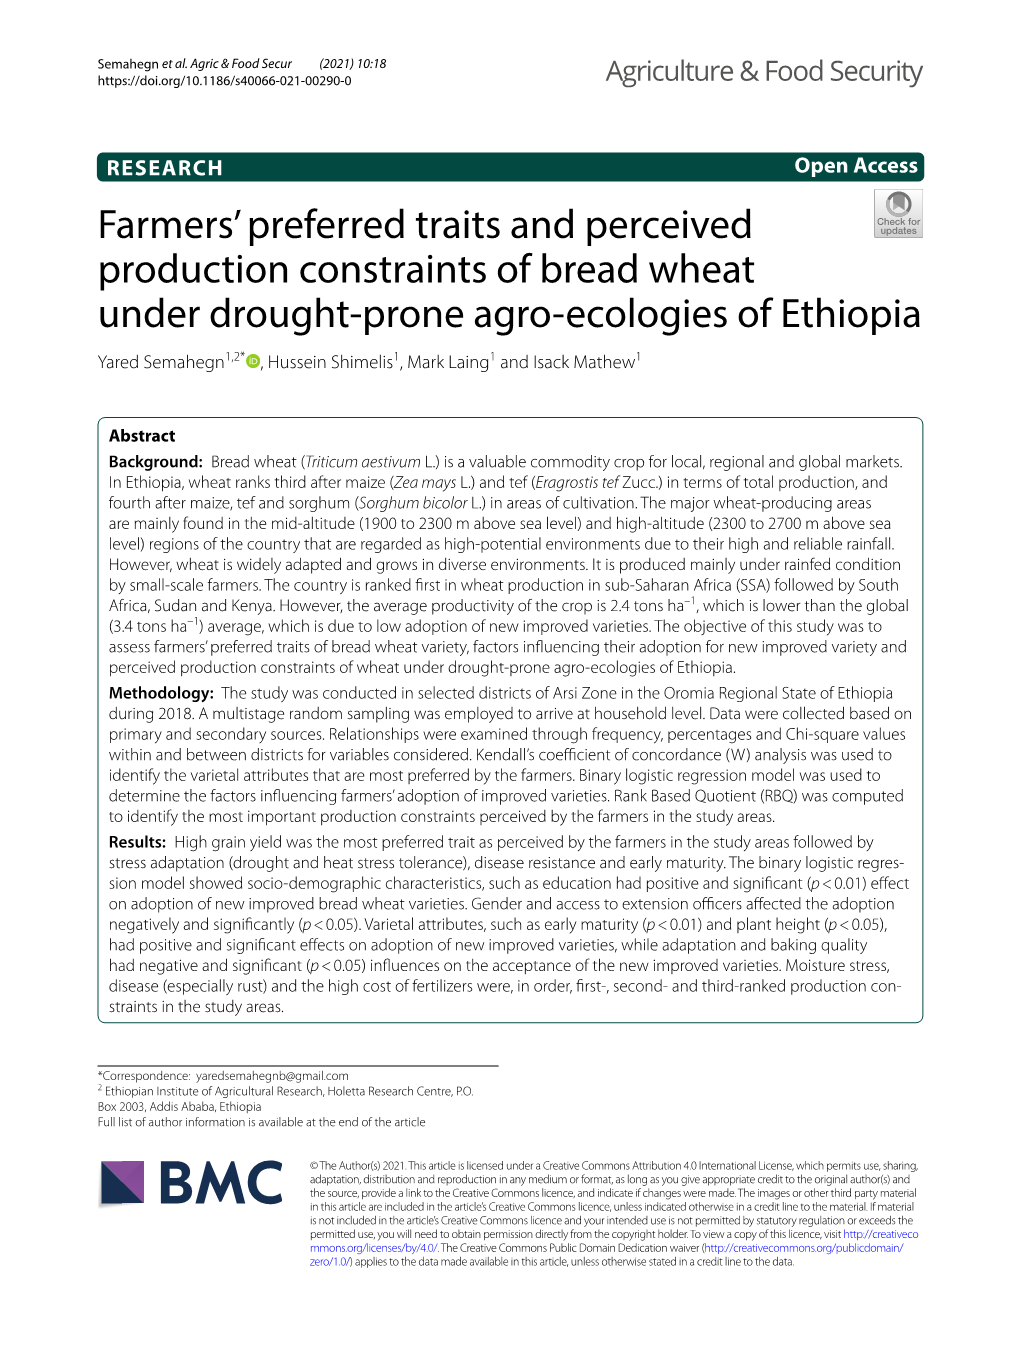 Farmers' Preferred Traits and Perceived Production Constraints Of